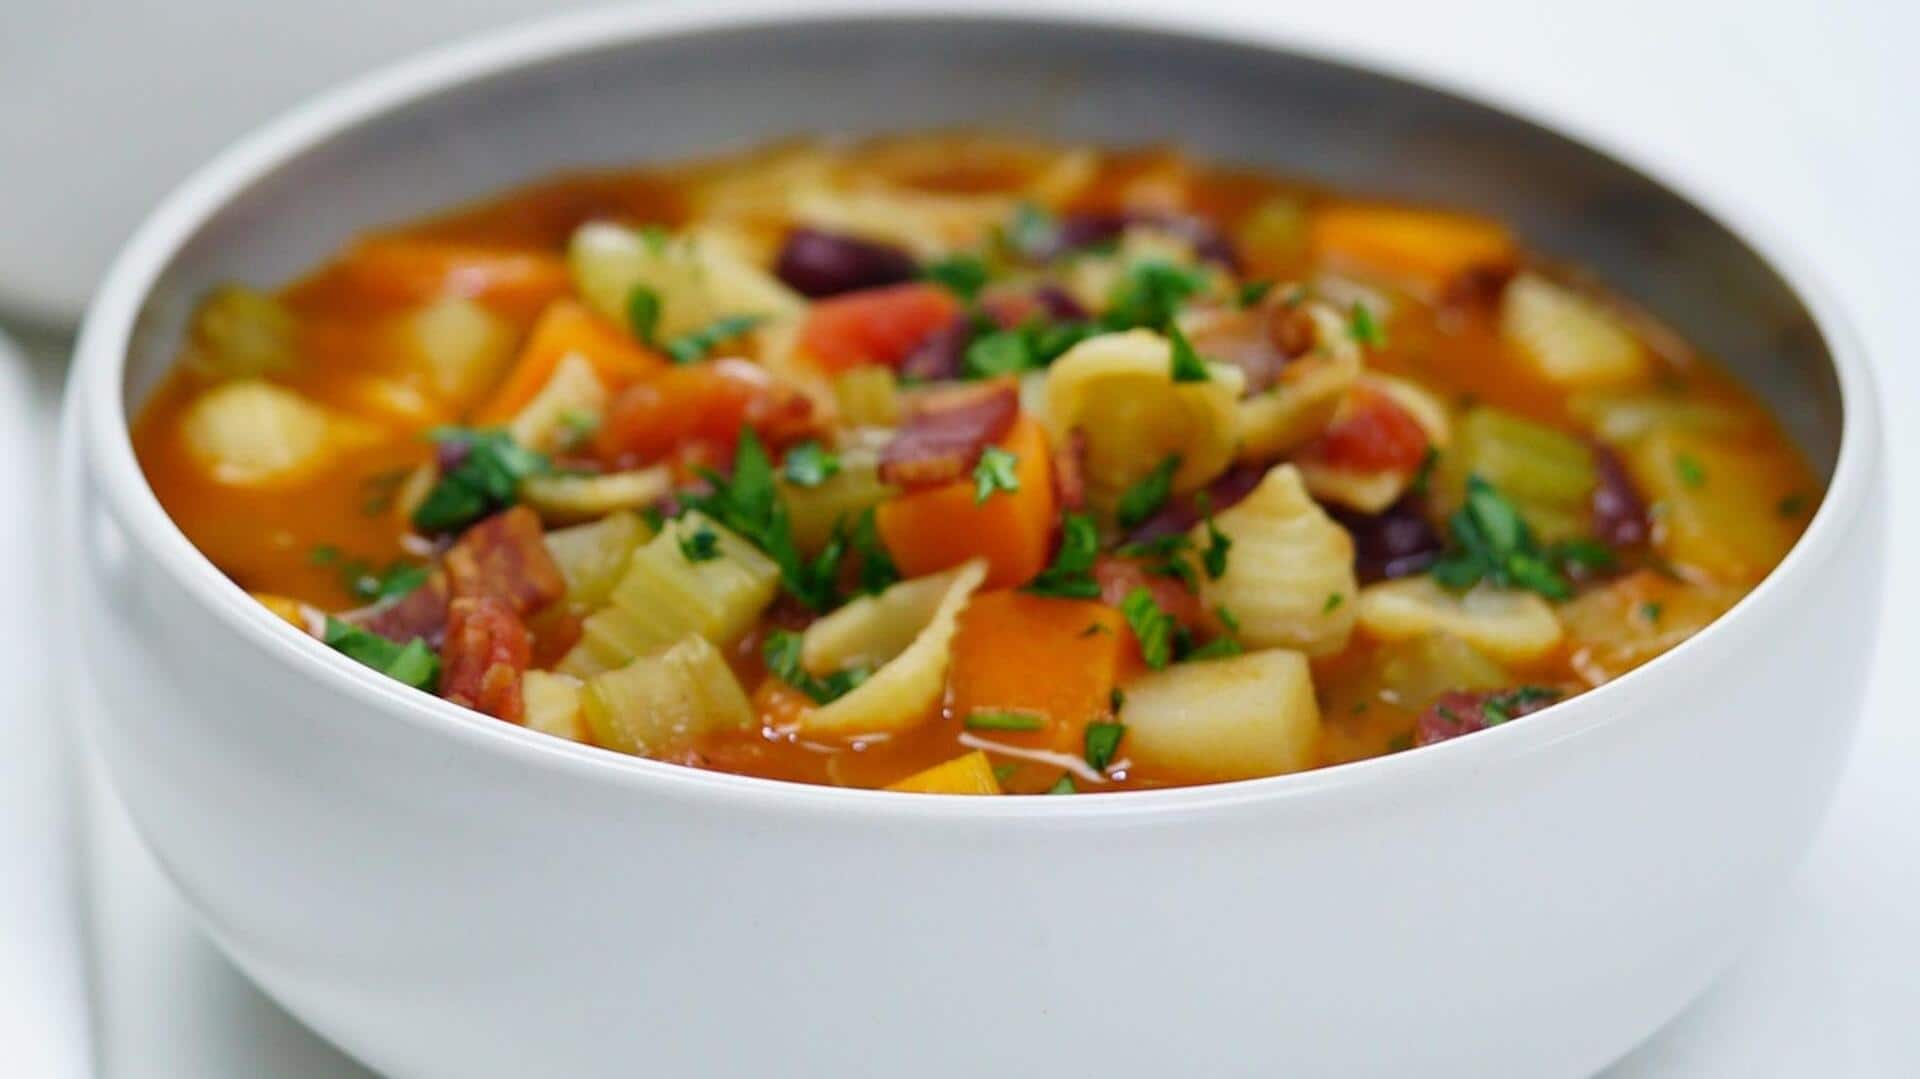 Check out this vegan minestrone soup recipe